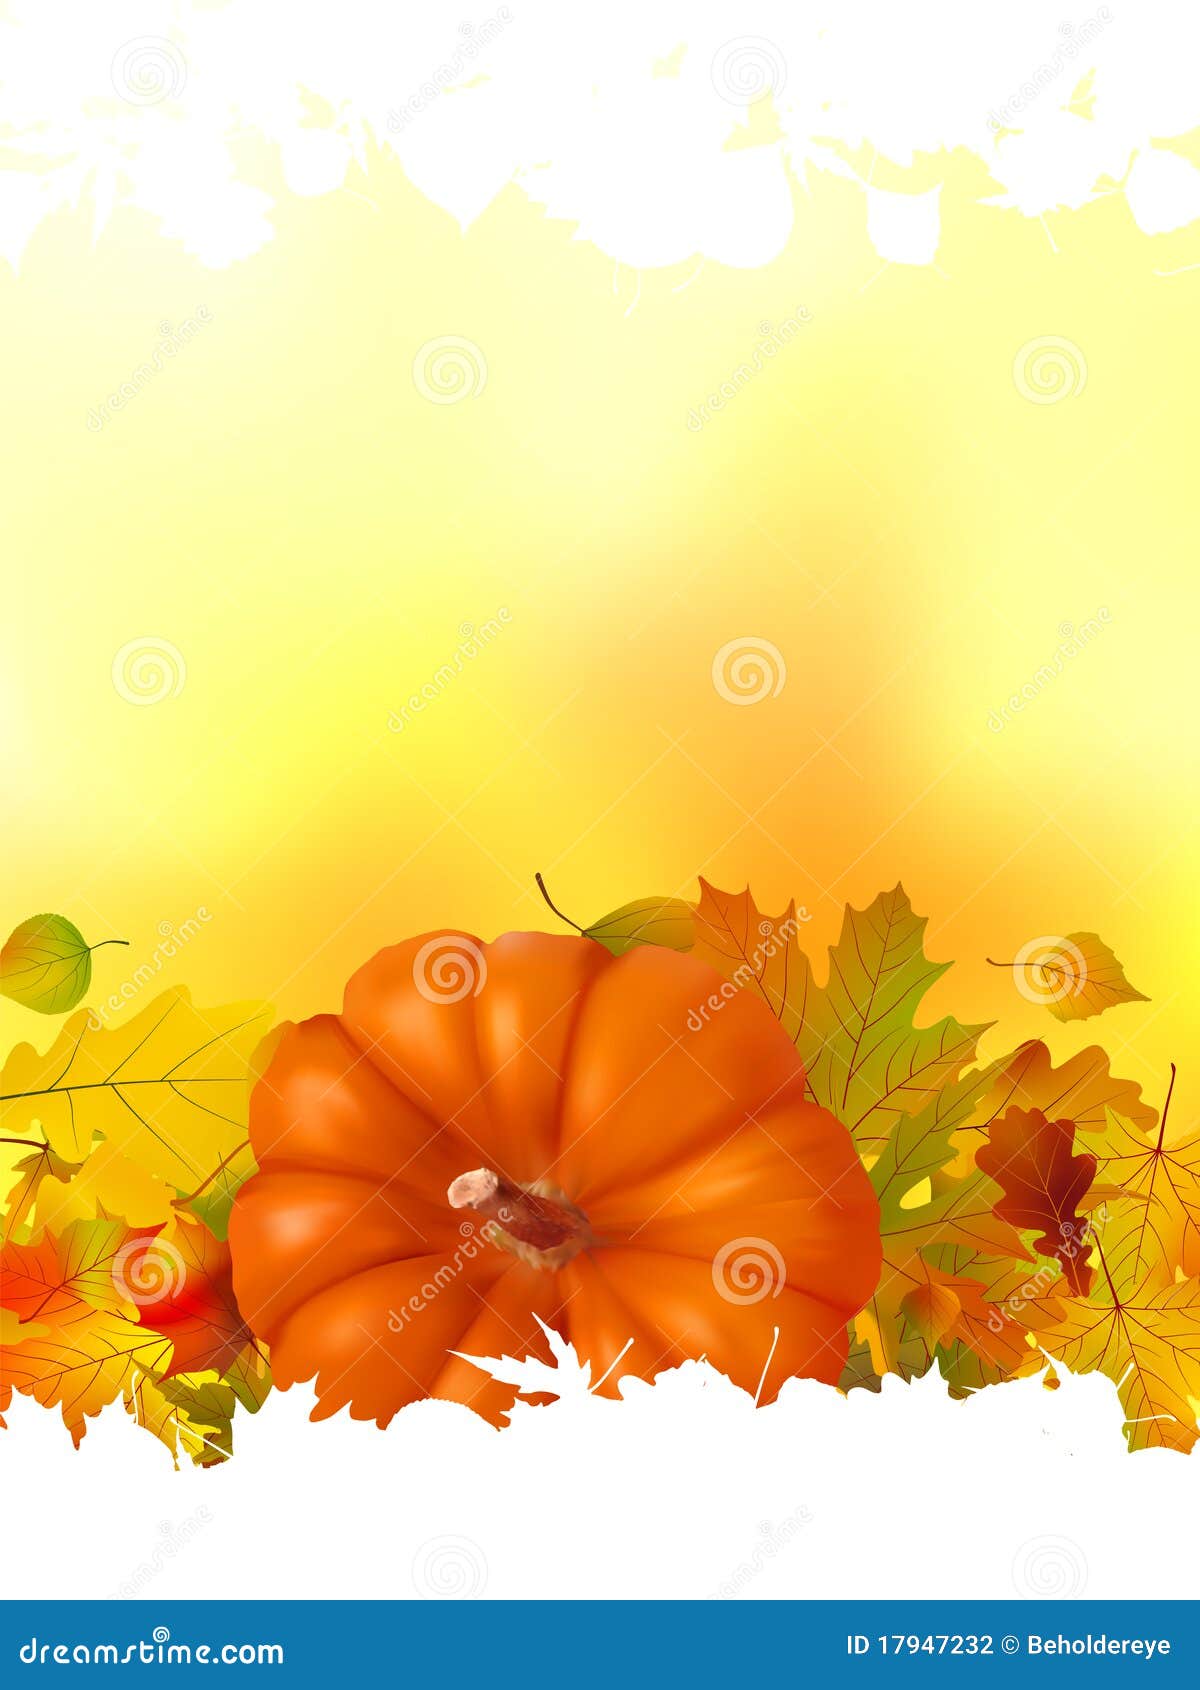 Autumn Background with Place for Your Text. EPS 8 Stock Vector ...